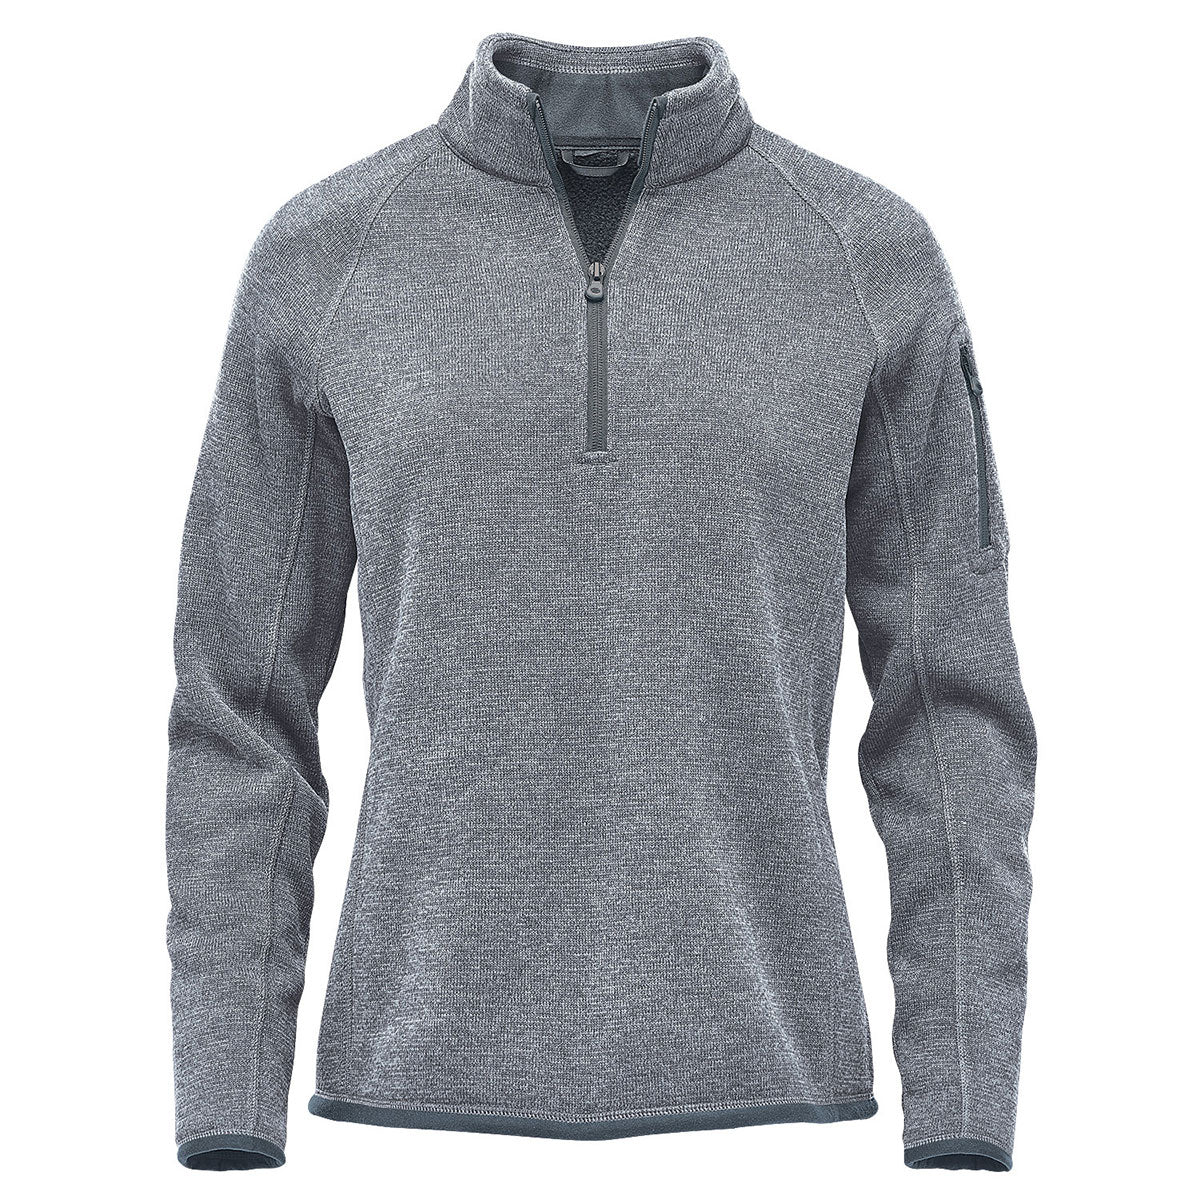 XERSION performance 1/4 zip pullover  1/4 zip pullover, Pullover, Clothes  design